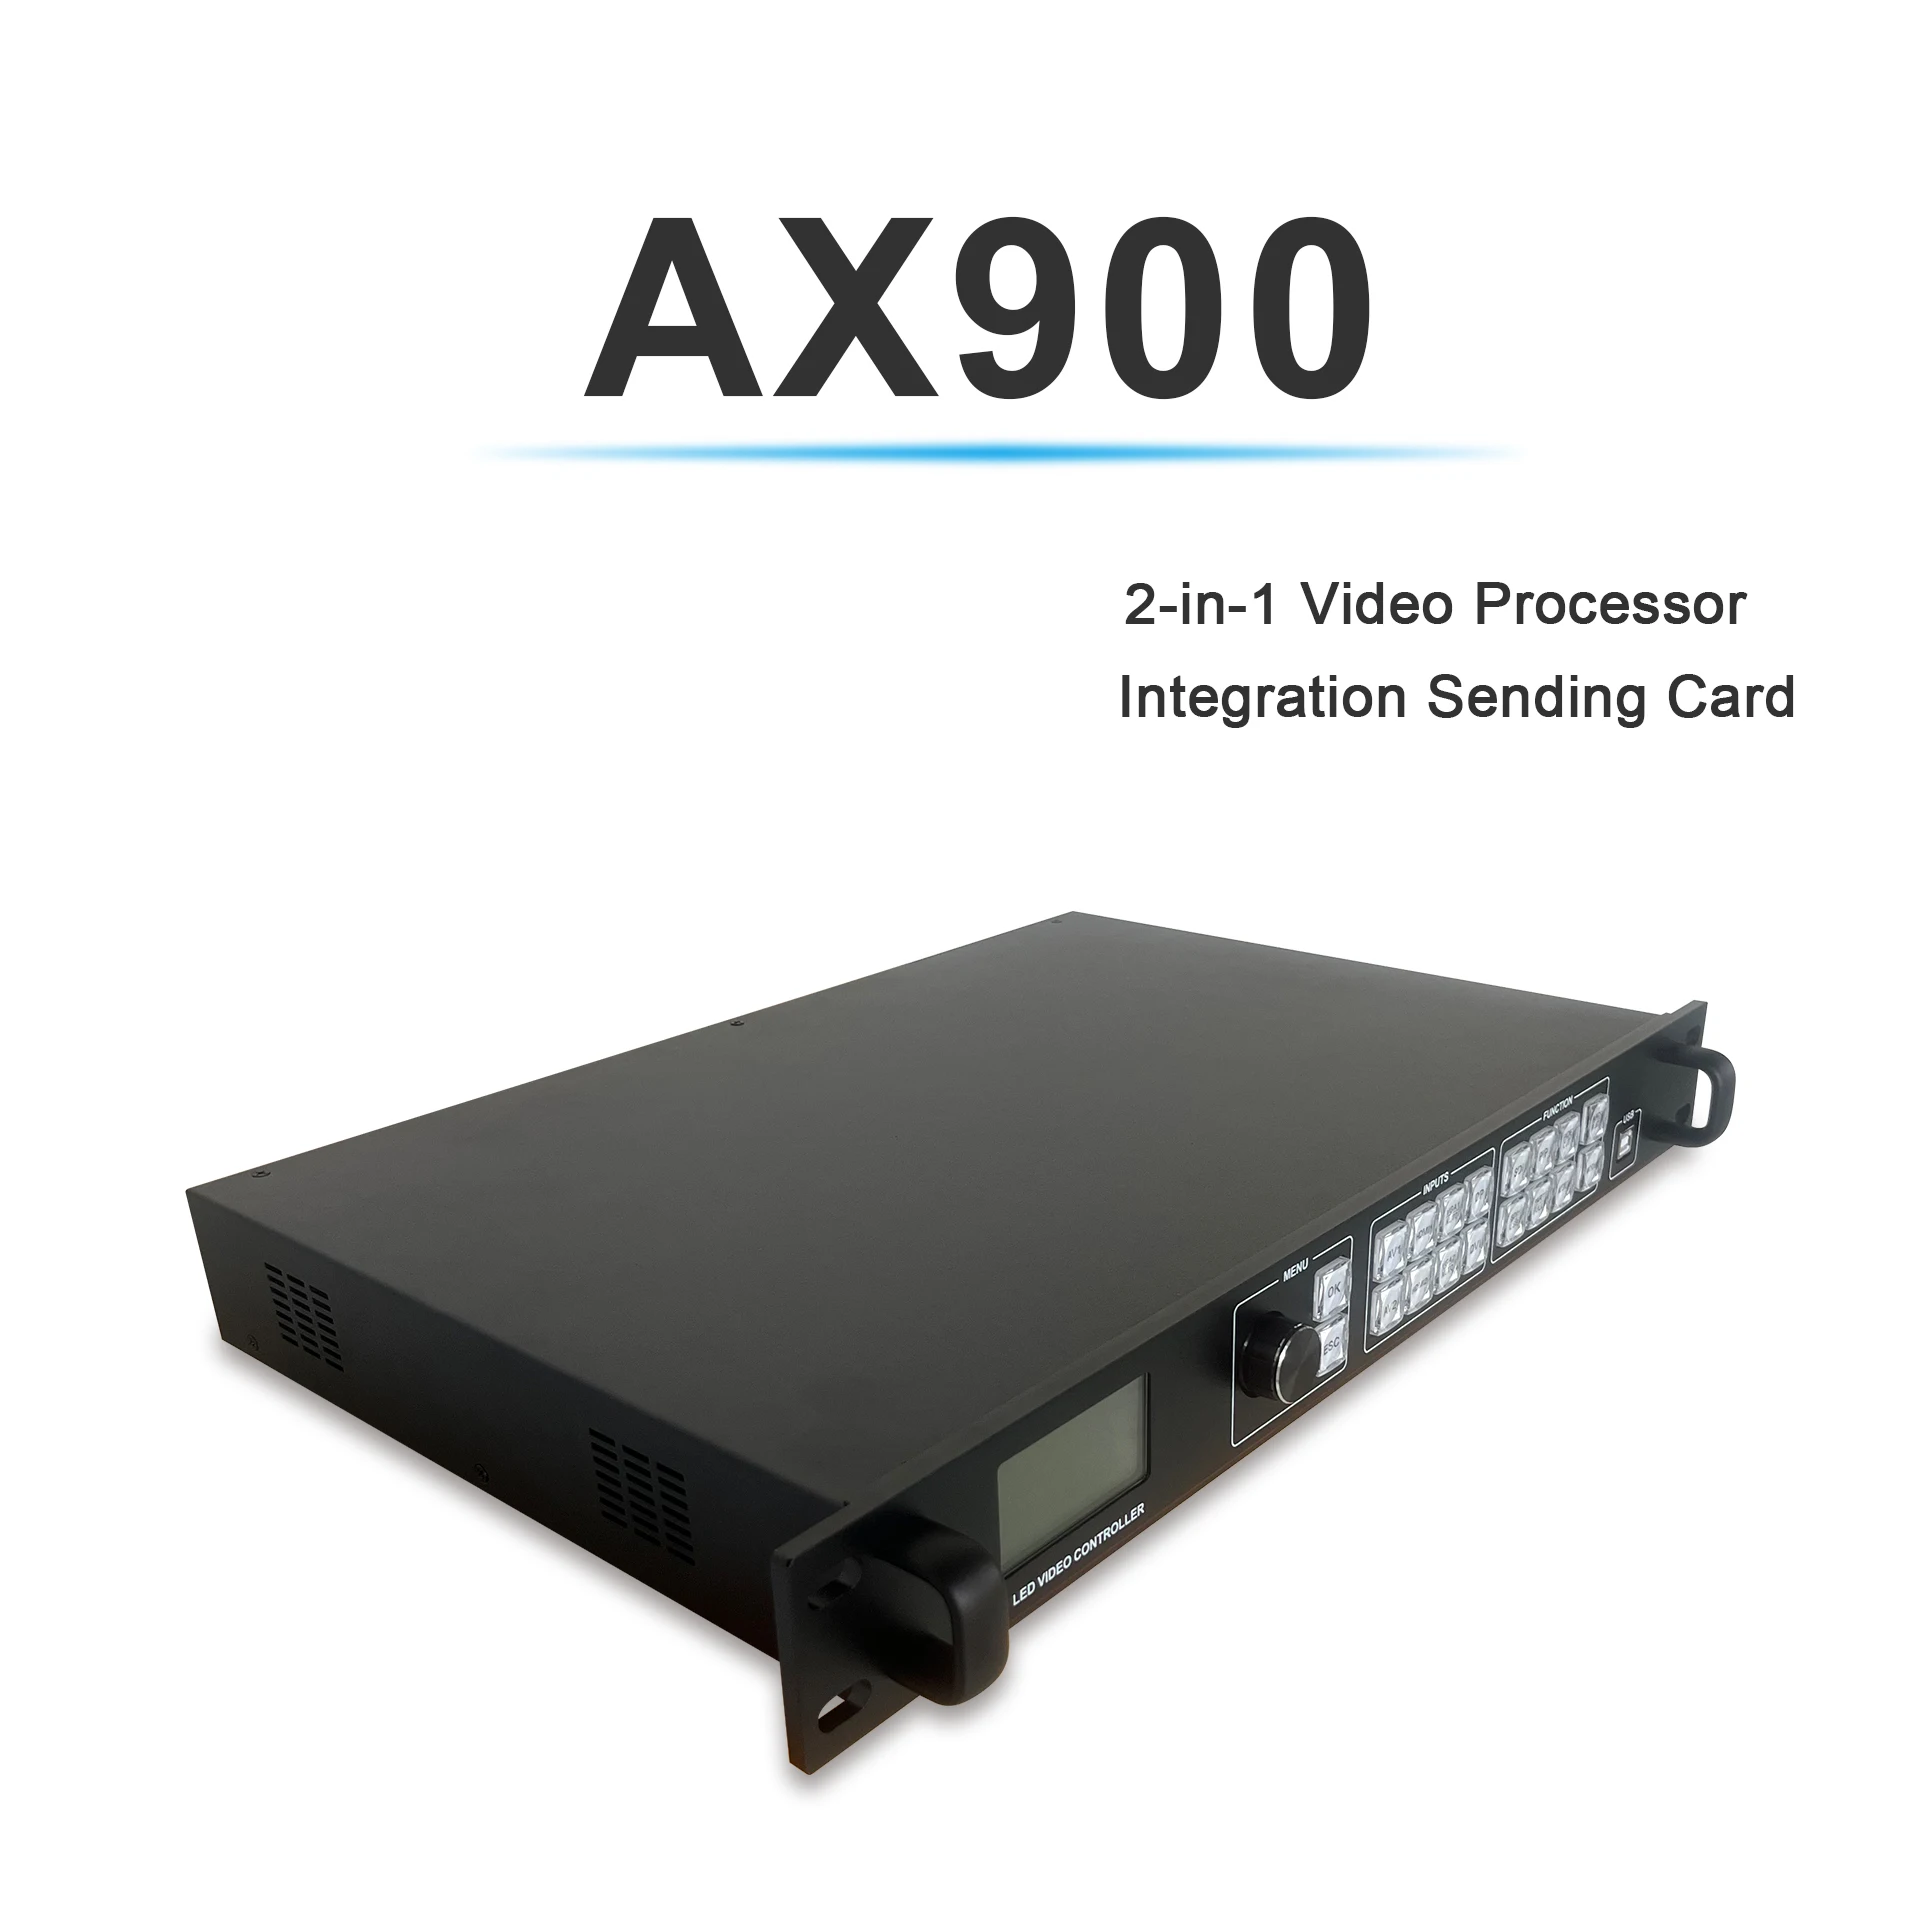 LED Video Processor Controller AMS-AX900 Like VX400  With Sending Card MSD600 Support PIP POP Seamless Switching Splicer